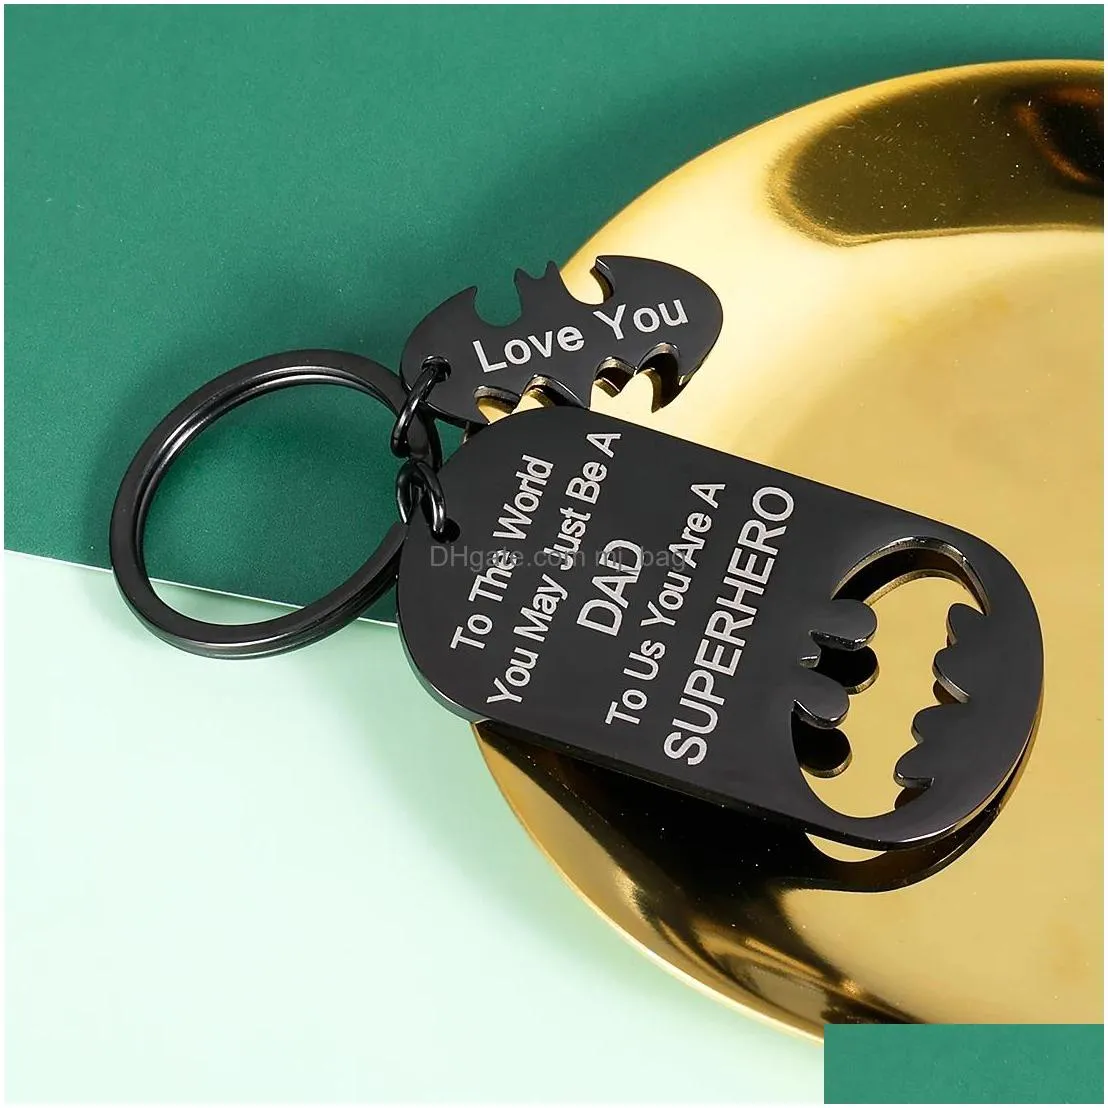 party favor fathers day gift dad birthday key chain is husband from daughter son wife child i love you key ring pendant inventory